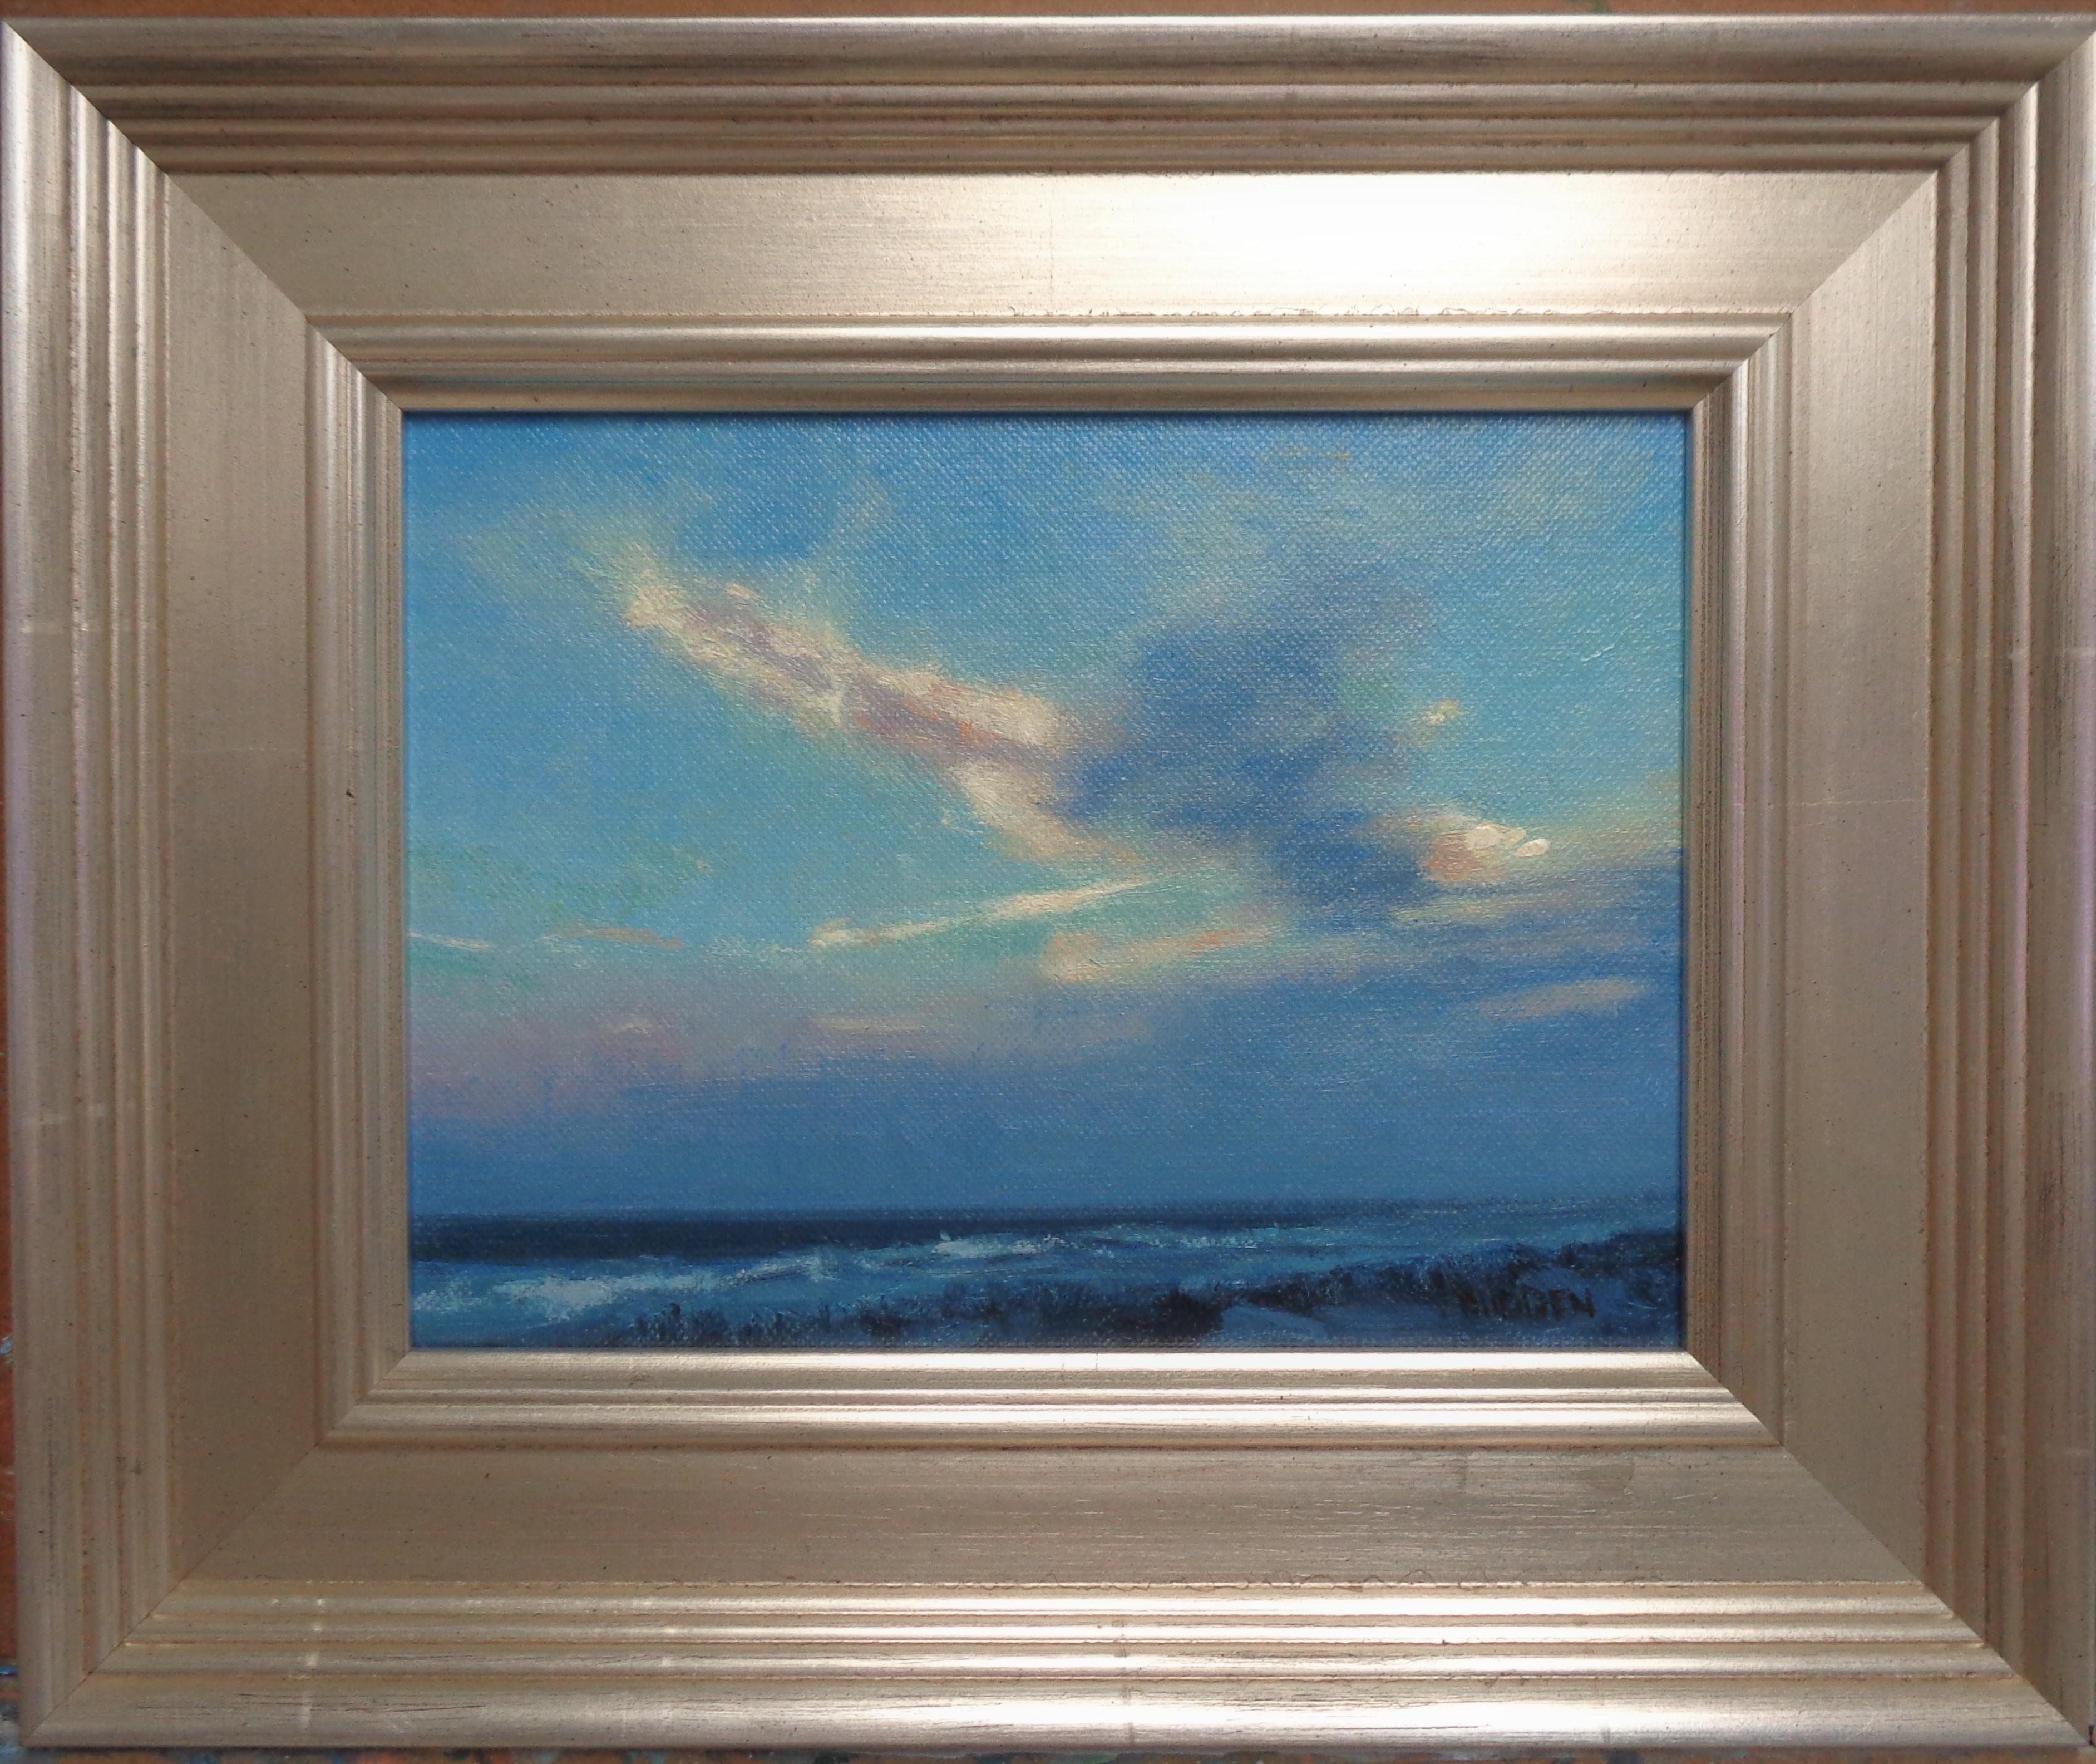 An oil painting on panel by award winning contemporary artist Michael Budden that showcases a seascape with clearing skies after a rainy day created in an impressionistic realism style.  This is the study painting for the larger version listed here